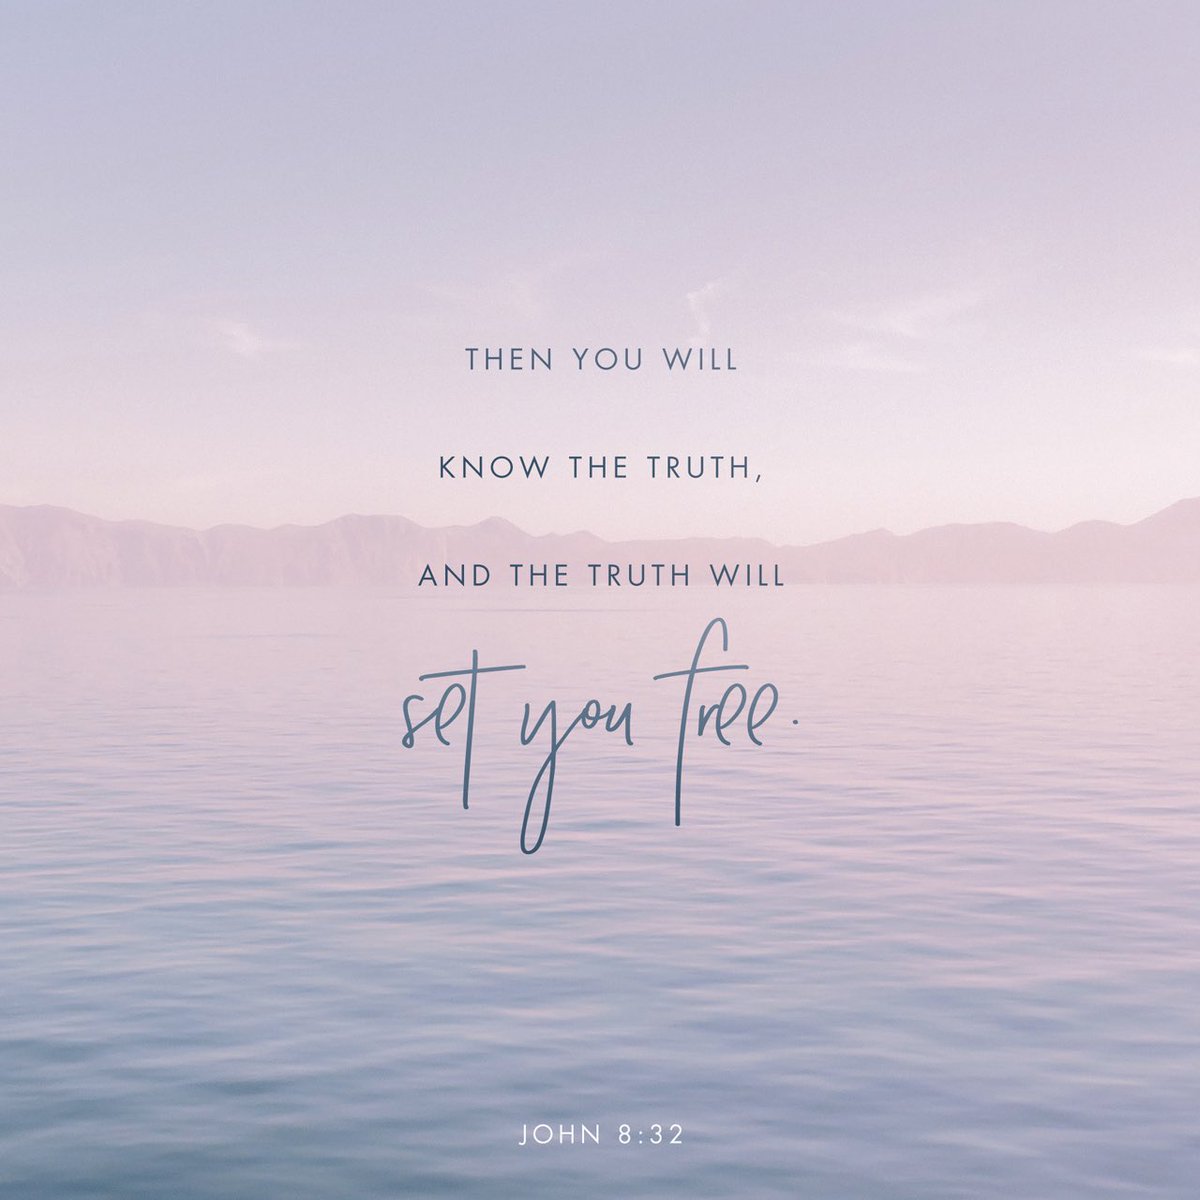 “and you will know the truth, and the truth will set you free.””
John 8:32
.
.
.
#shestandsintruth #walkbyfaith #savedbygrace #lampandlight #readthebible #readyourbible #dailybible #shereadstruth #wellwateredwomen #bedeeplyrooted #christianmom #christianwoman #christianwife